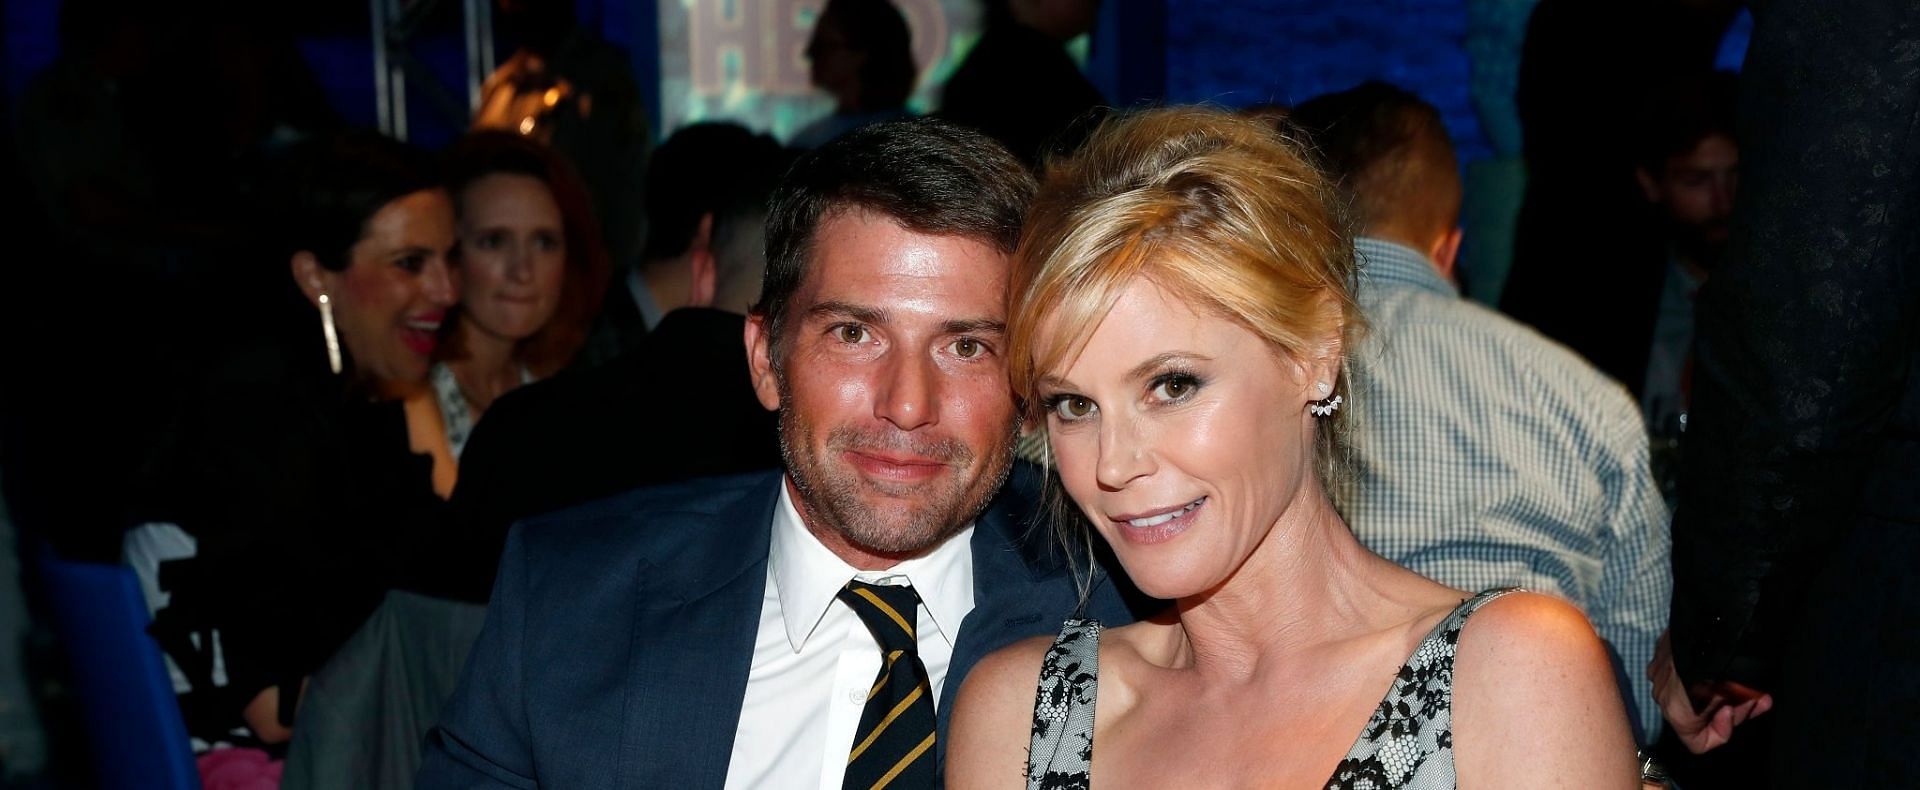 Julie Bowen and Scott Phillips parted ways in 2018 (Image via Rich Polk/Getty Images)